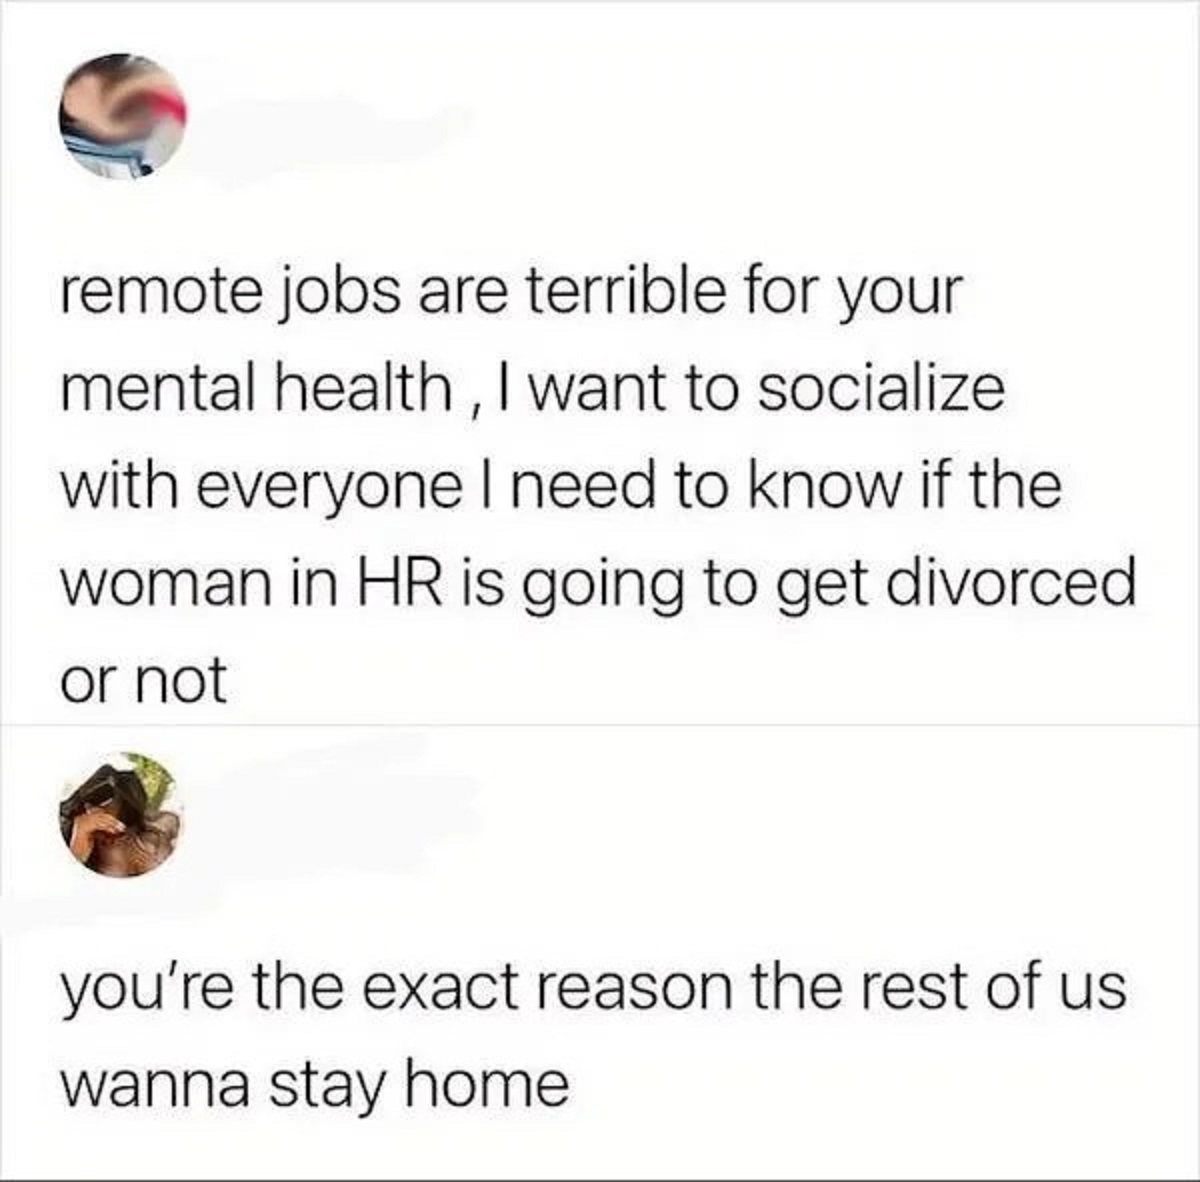 screenshot - remote jobs are terrible for your mental health, I want to socialize with everyone I need to know if the woman in Hr is going to get divorced or not you're the exact reason the rest of us wanna stay home